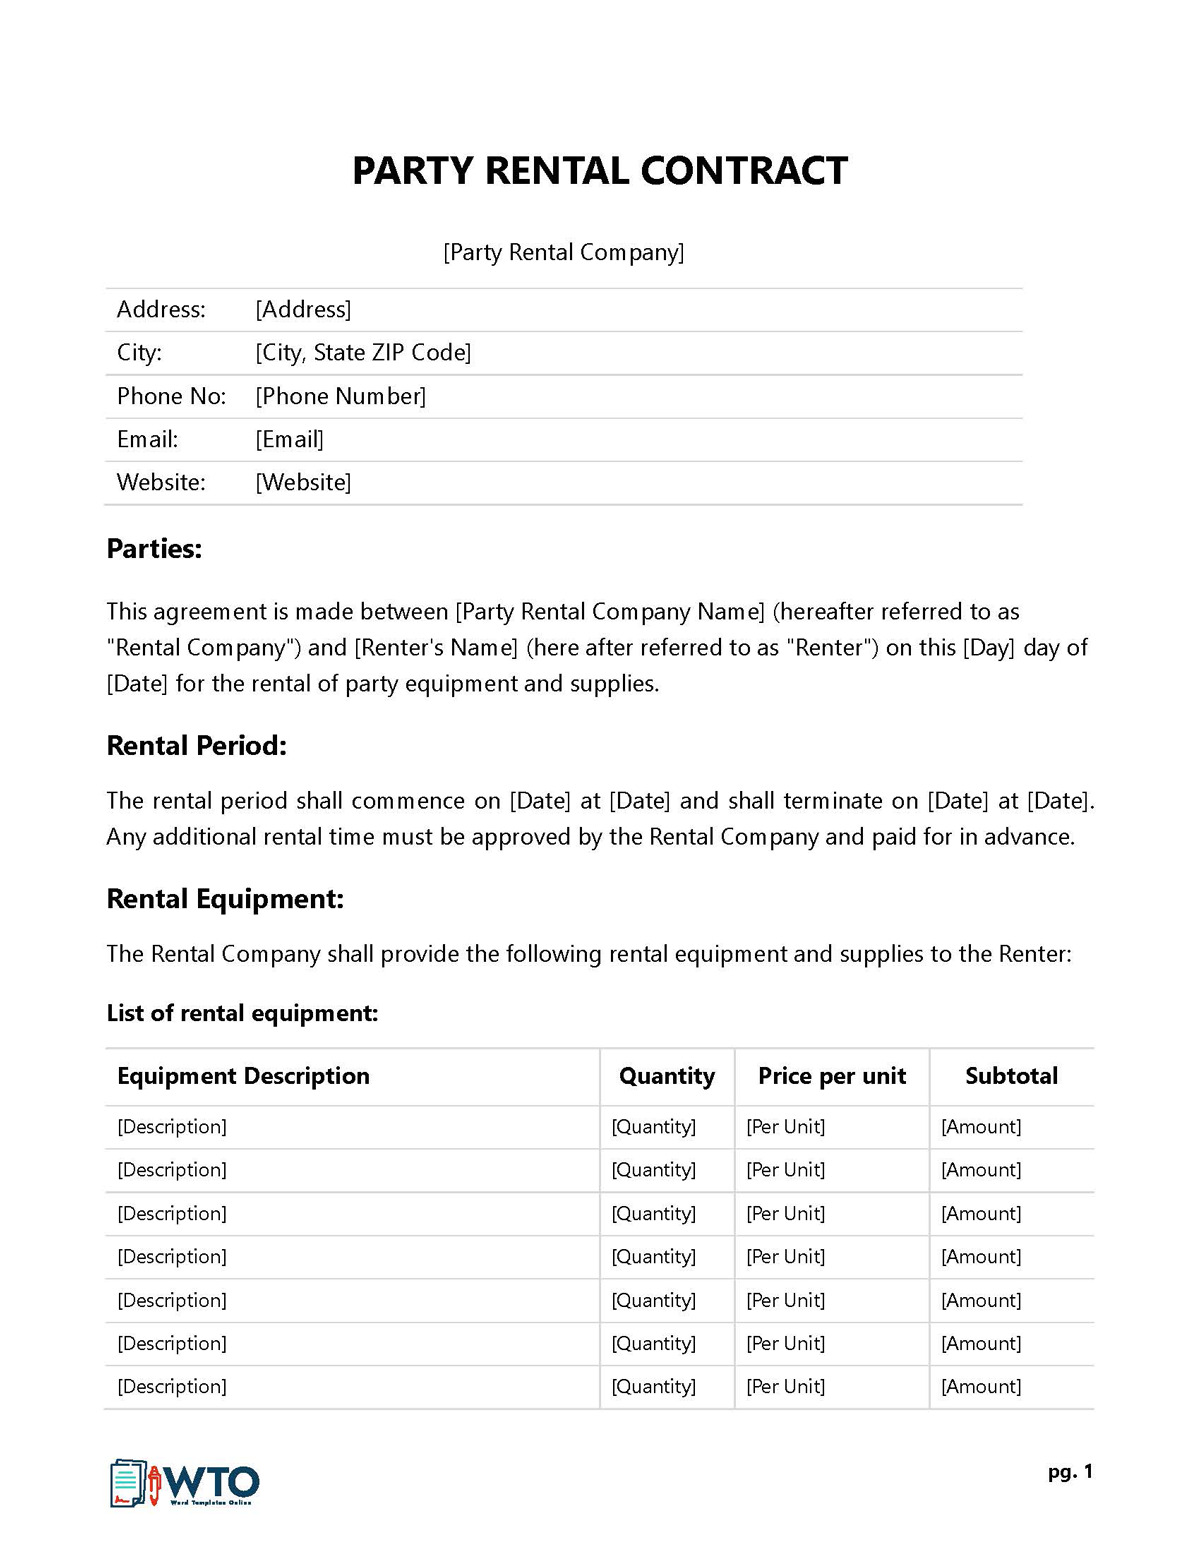 Party Rental Contract Sample in MS Word